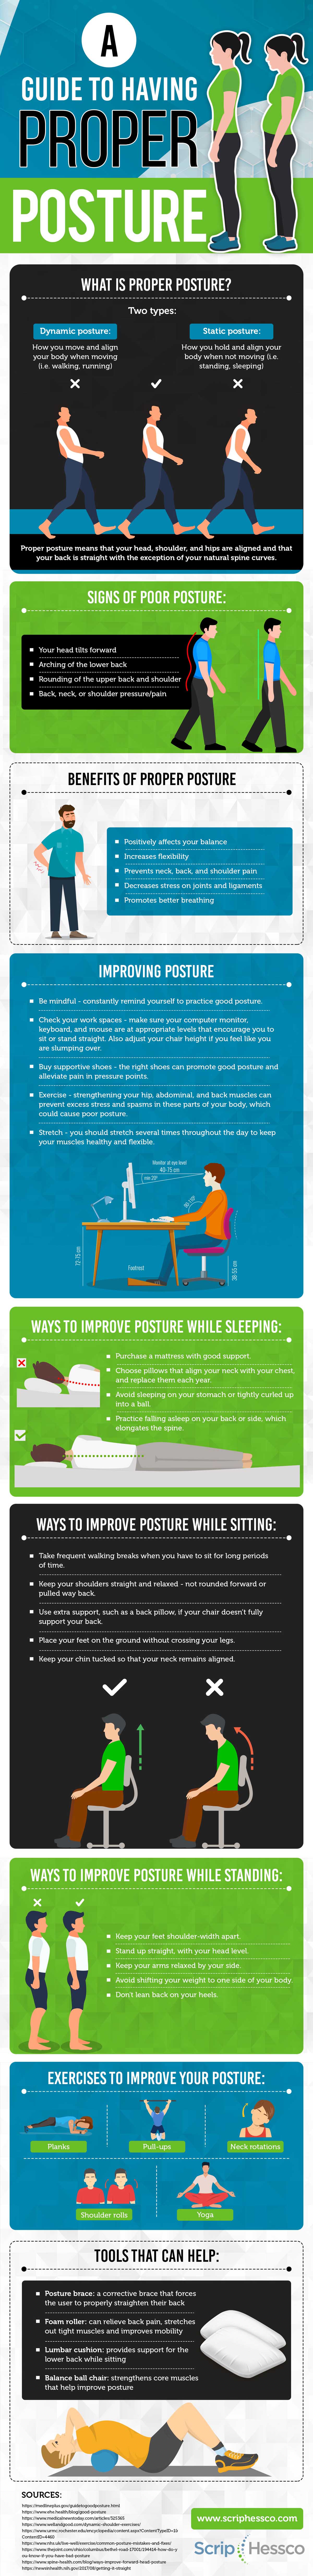 A Guide to Having Proper Posture